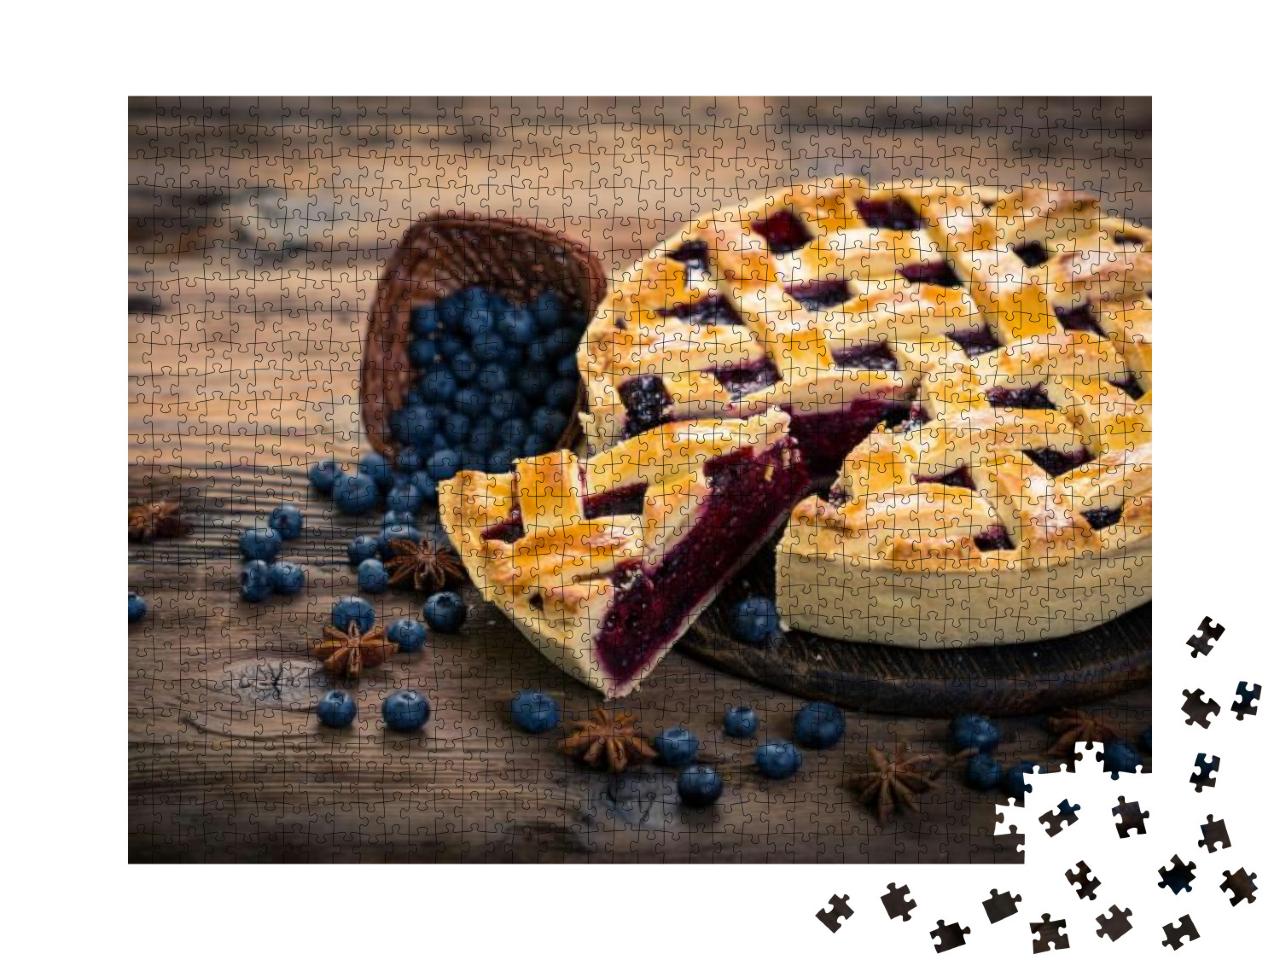 Blueberry Pie... Jigsaw Puzzle with 1000 pieces